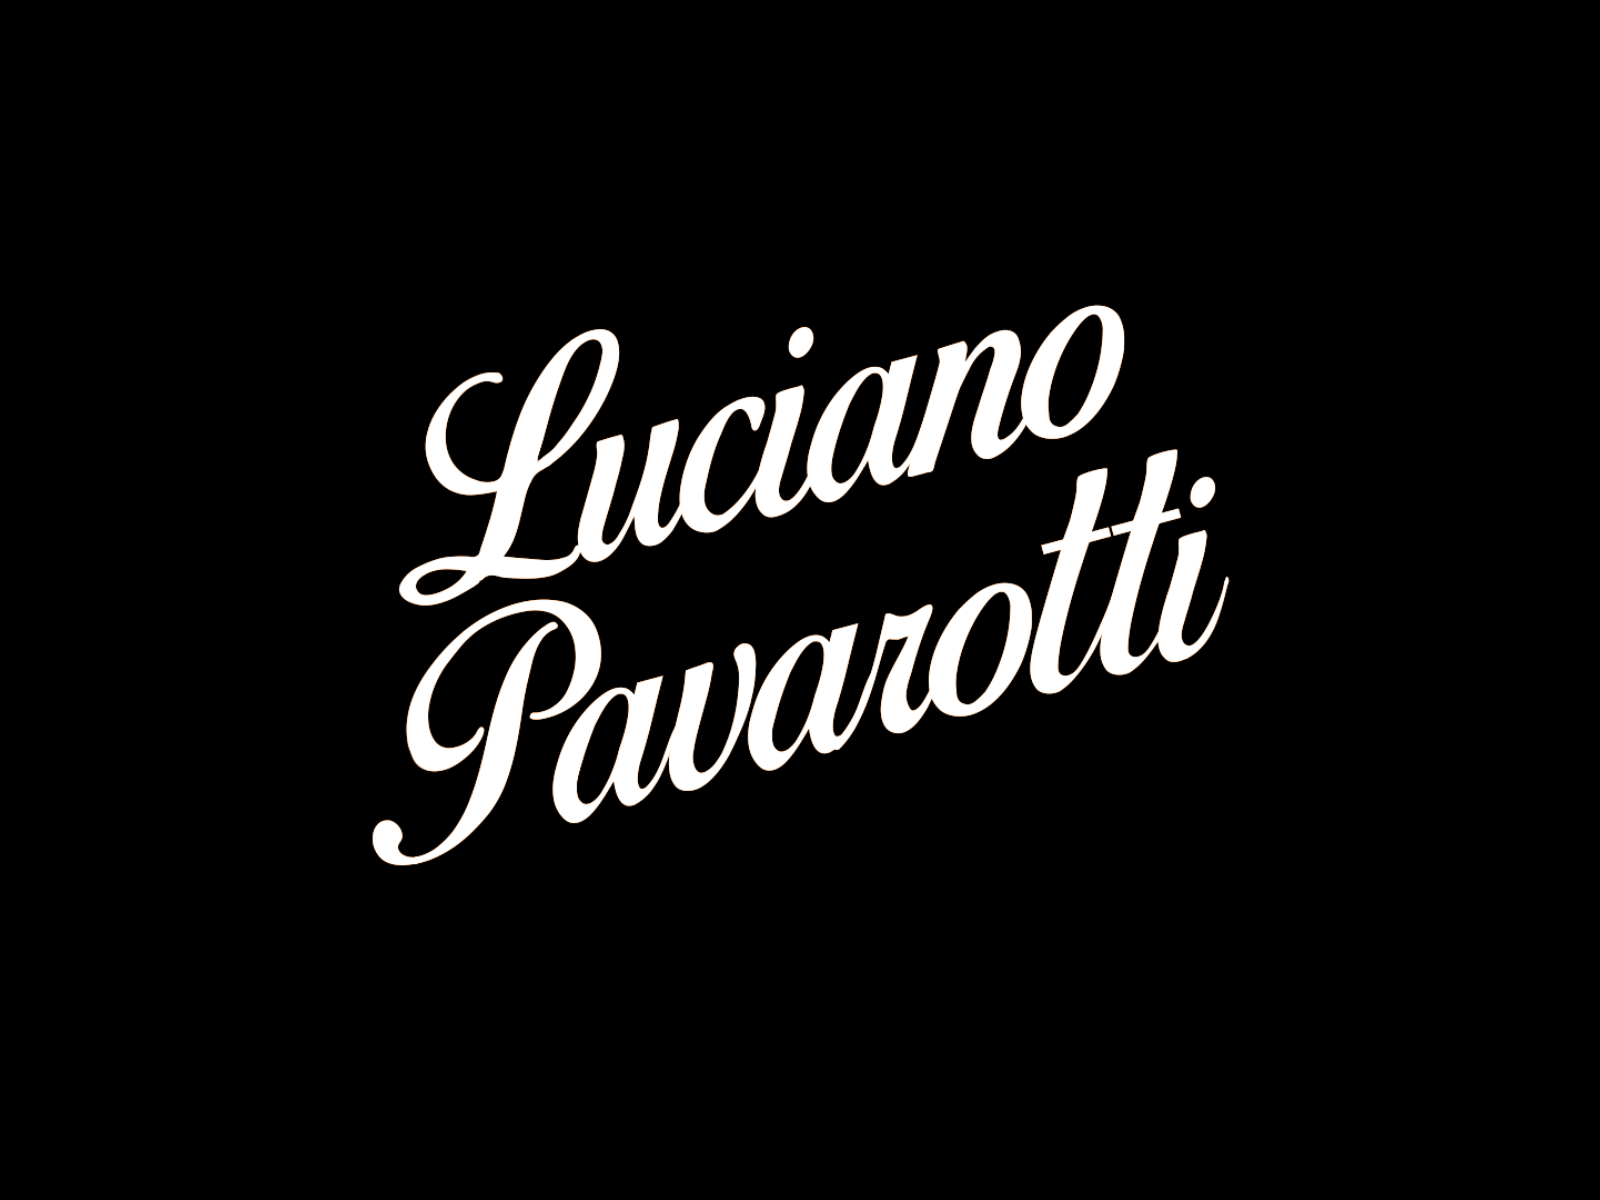 Luciano Pavarotti Type Animation adobeaftereffects after effects animation calligraphy graphic design illustration intro kinetic typography lettering logo logo and branding logo motion logoanimation logodesign logos logotype motion graphics motiongraphics type animation ui